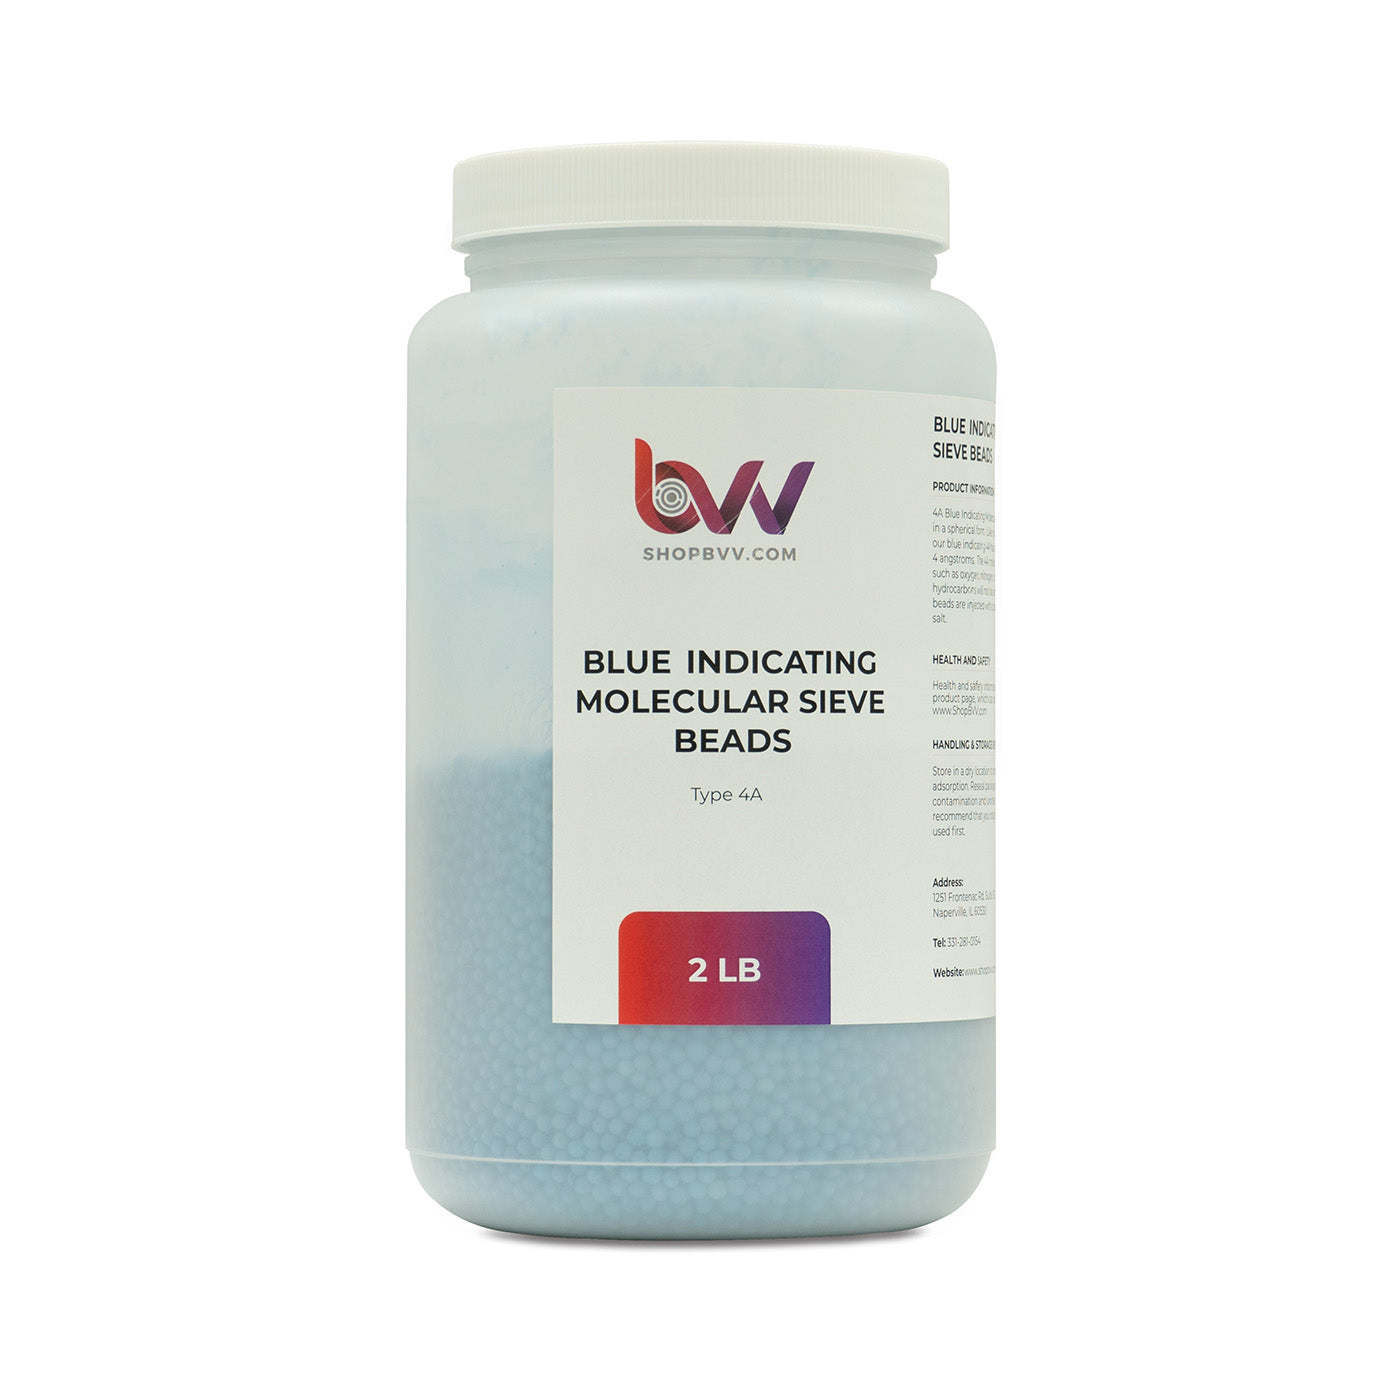 Indicating Molecular Sieve Beads Type 4A Shop All Categories BVV 2LBS 